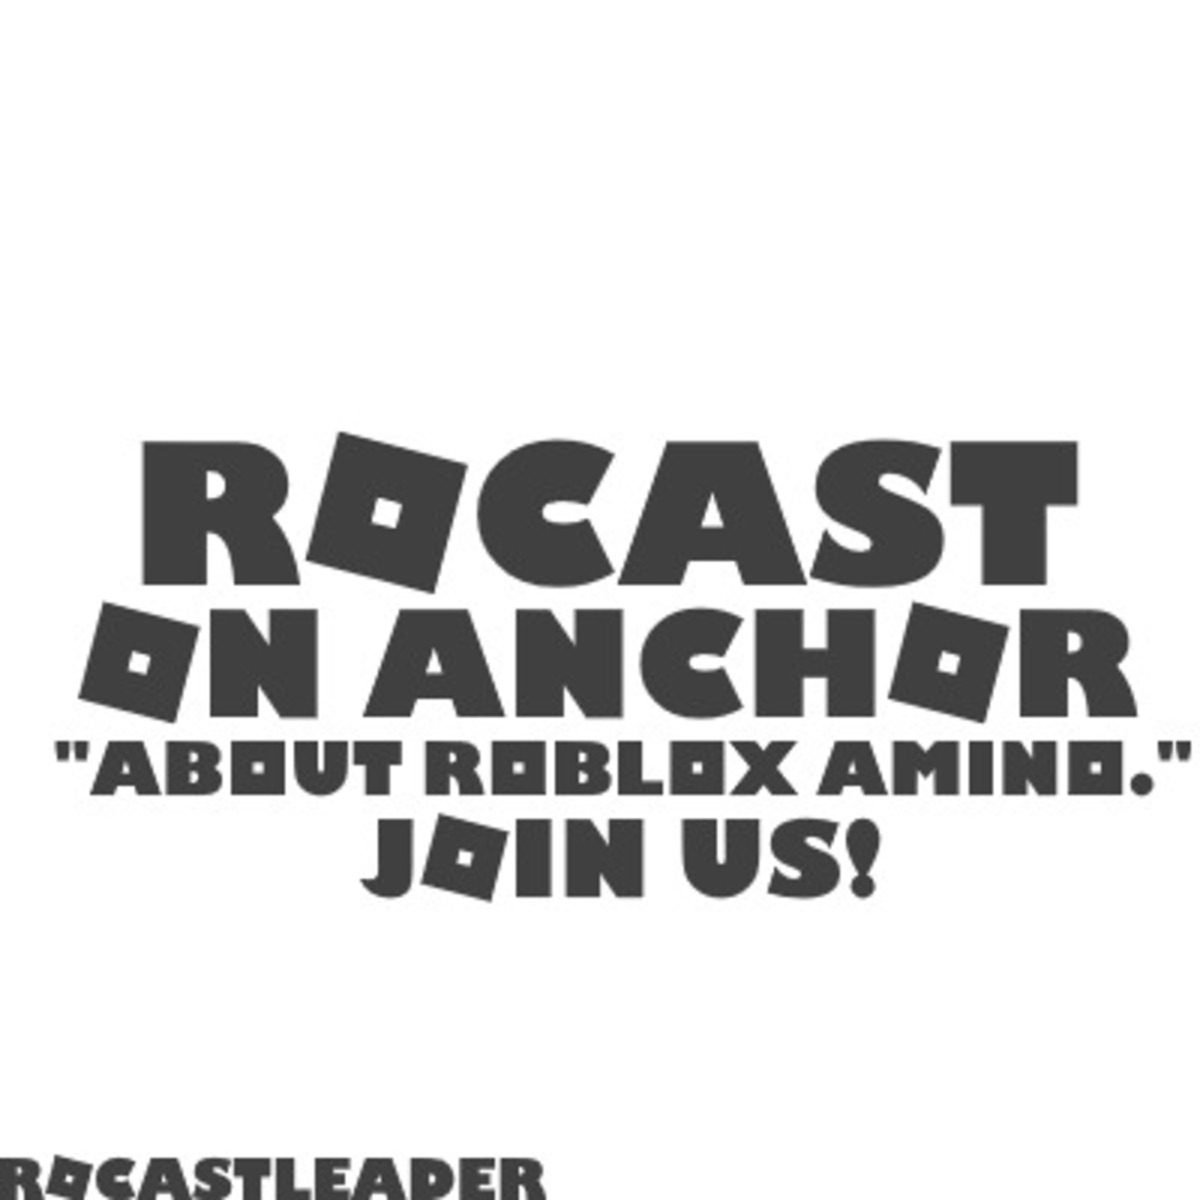 Related Rocast About Roblox Amino Podcast Podtail - ved roblox amino